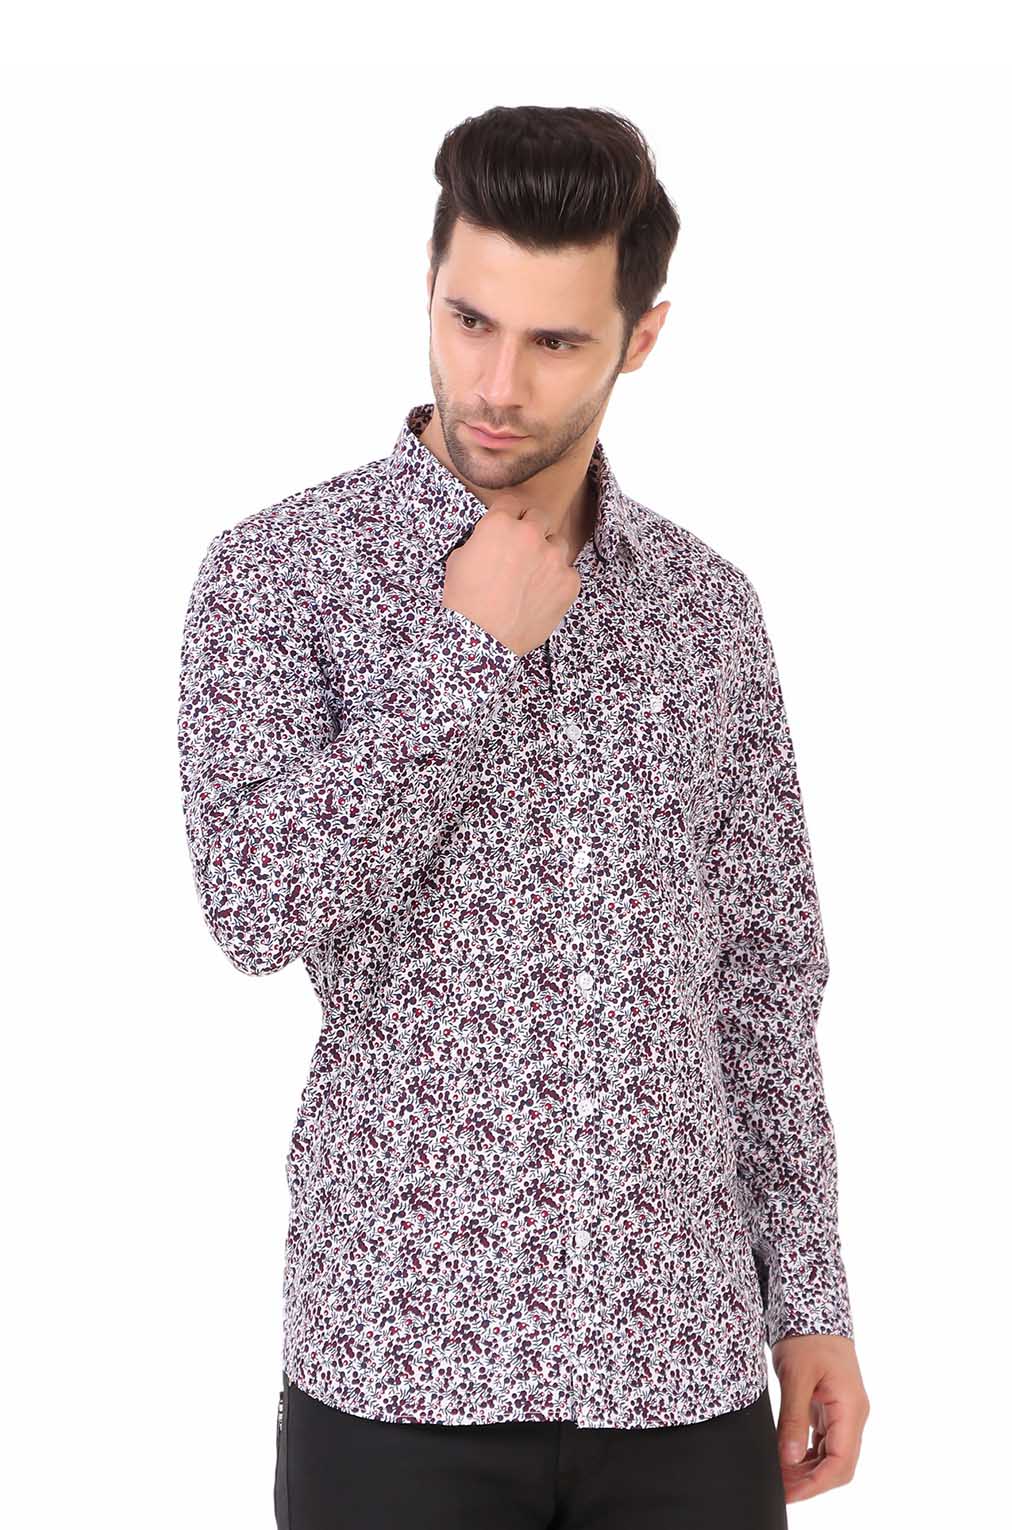 Multi-Patterned Casual Shirt